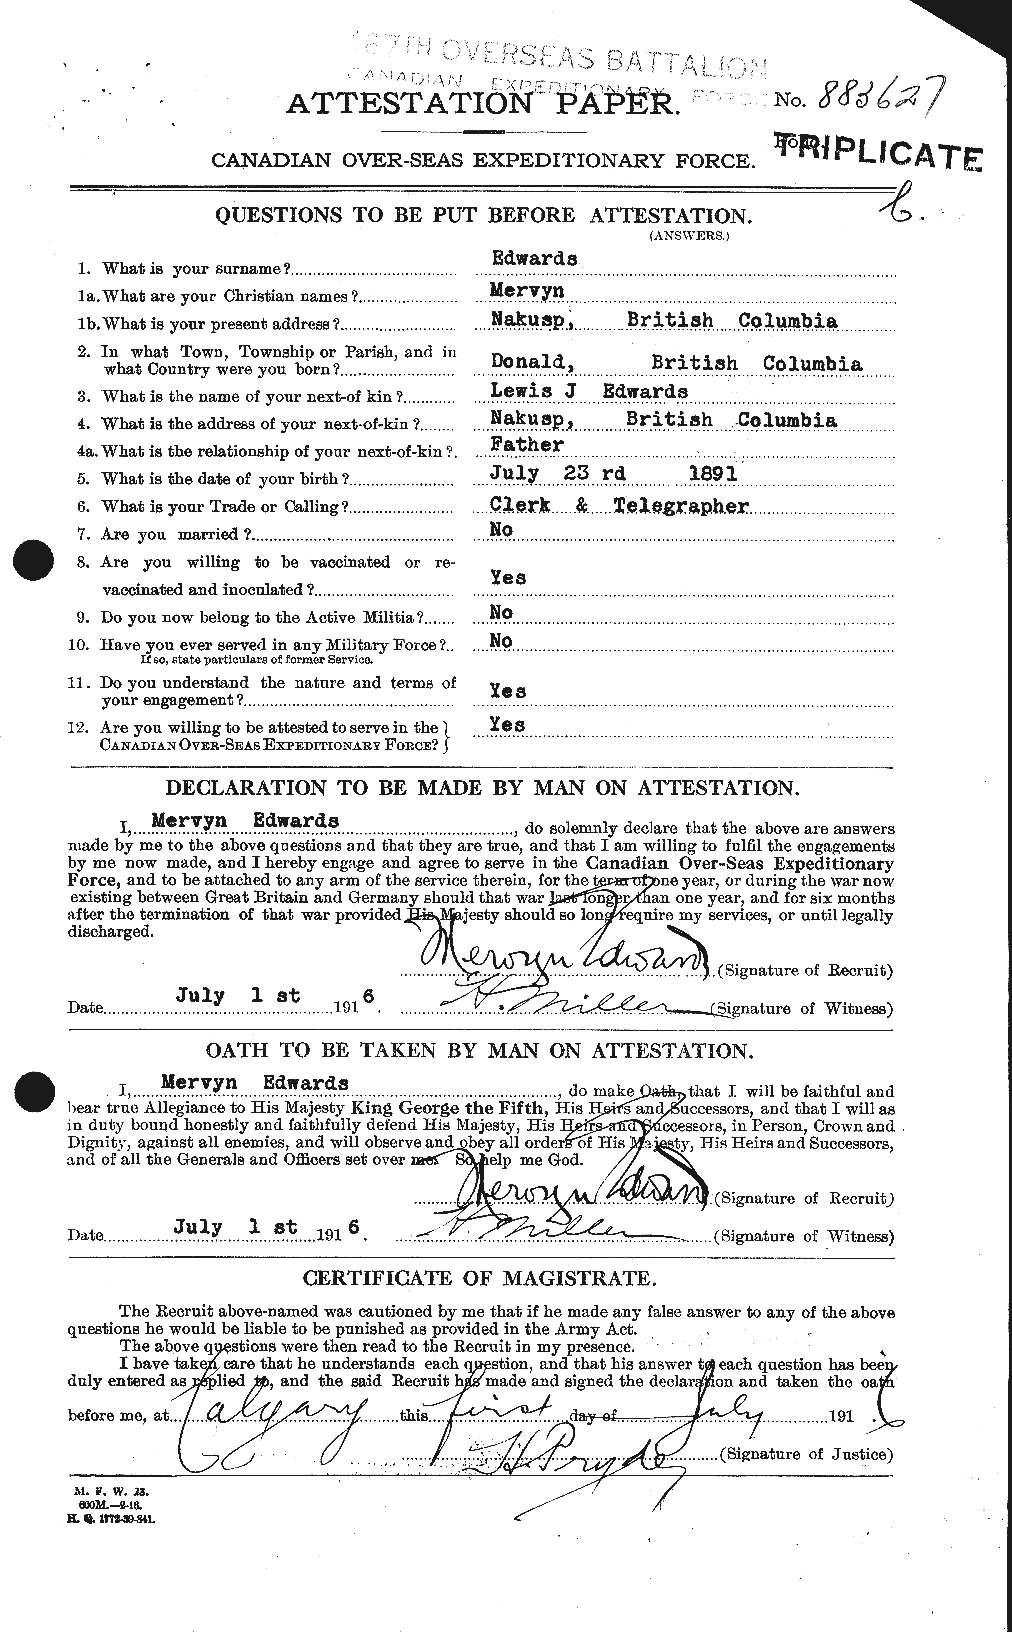 Personnel Records of the First World War - CEF 310216a